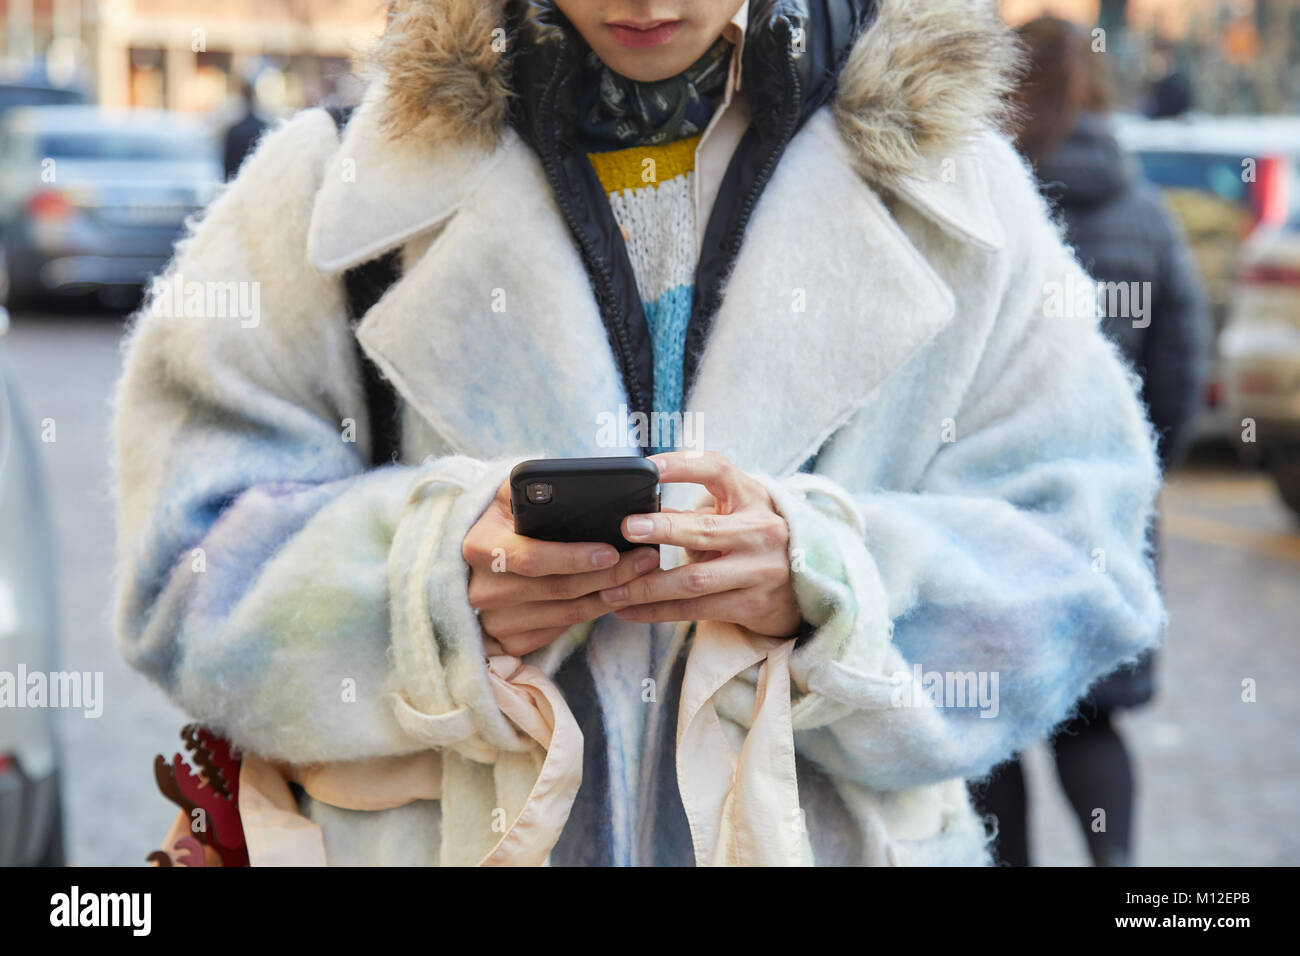 MILAN - JANUARY 14: Man with soft jacket in white and pale blue colors looking at phone before Daks fashion show, Milan Fashion Week street style on J Stock Photo